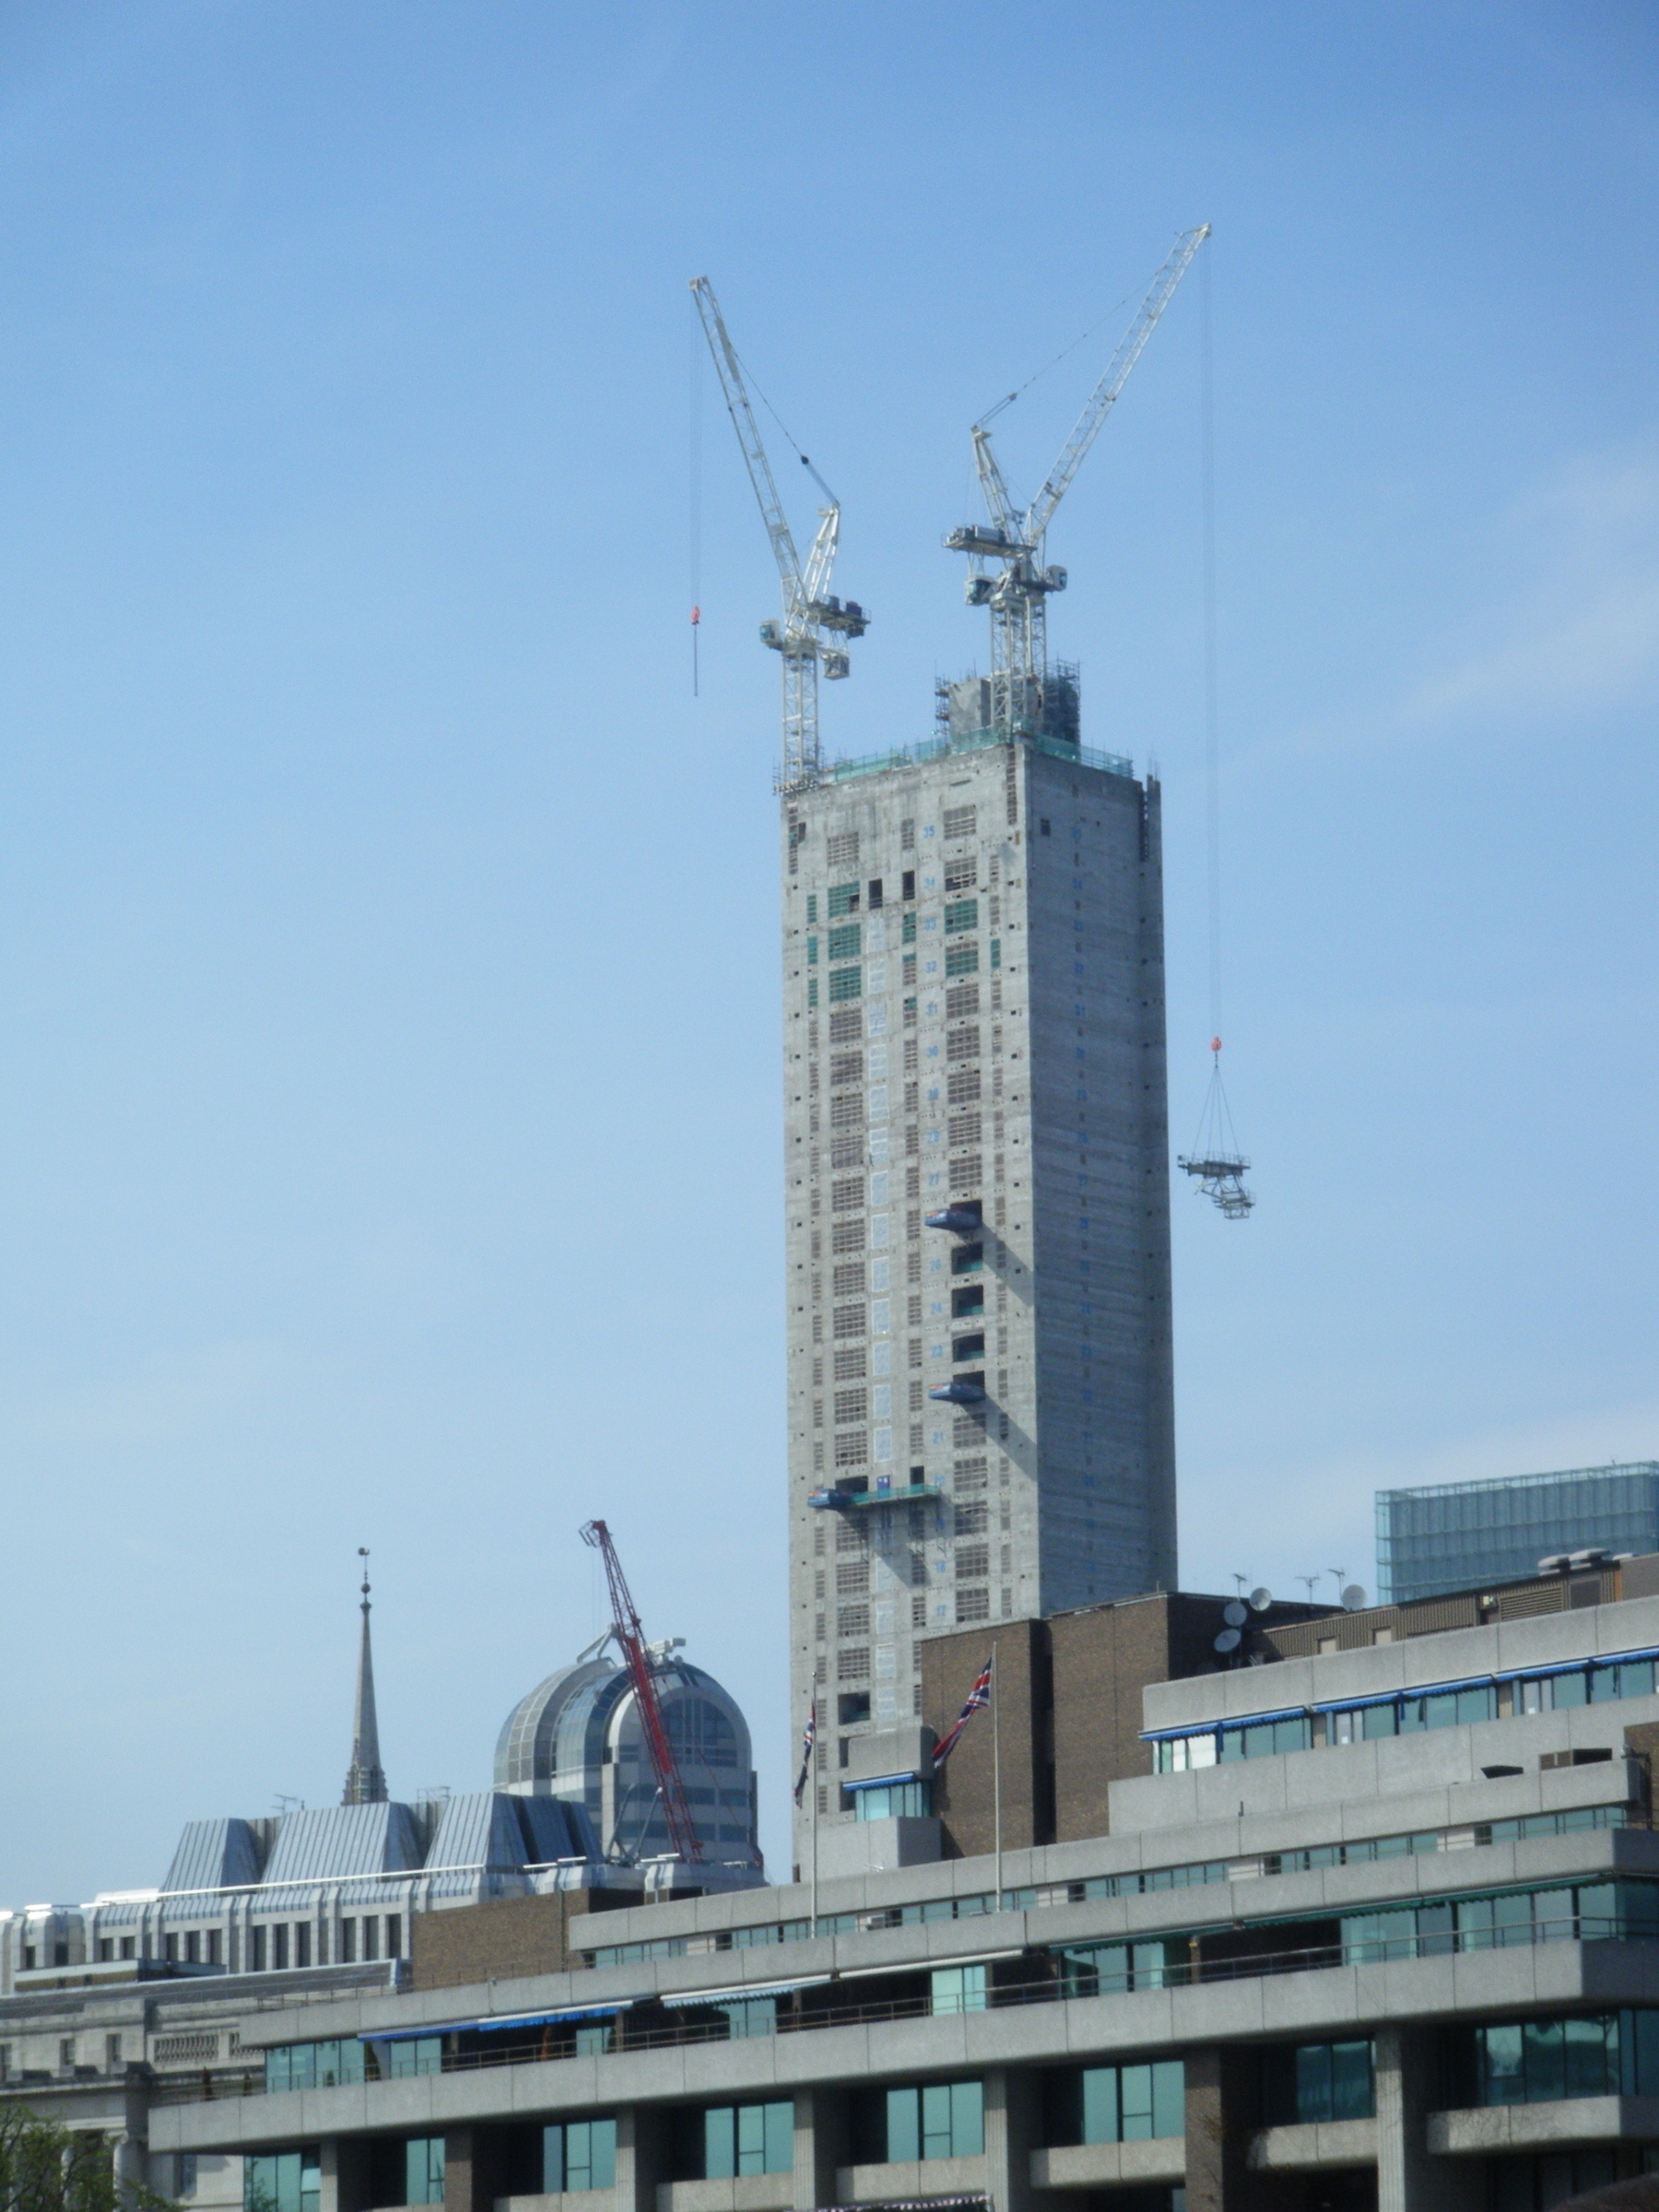 Building surrounded by cranes, London UK